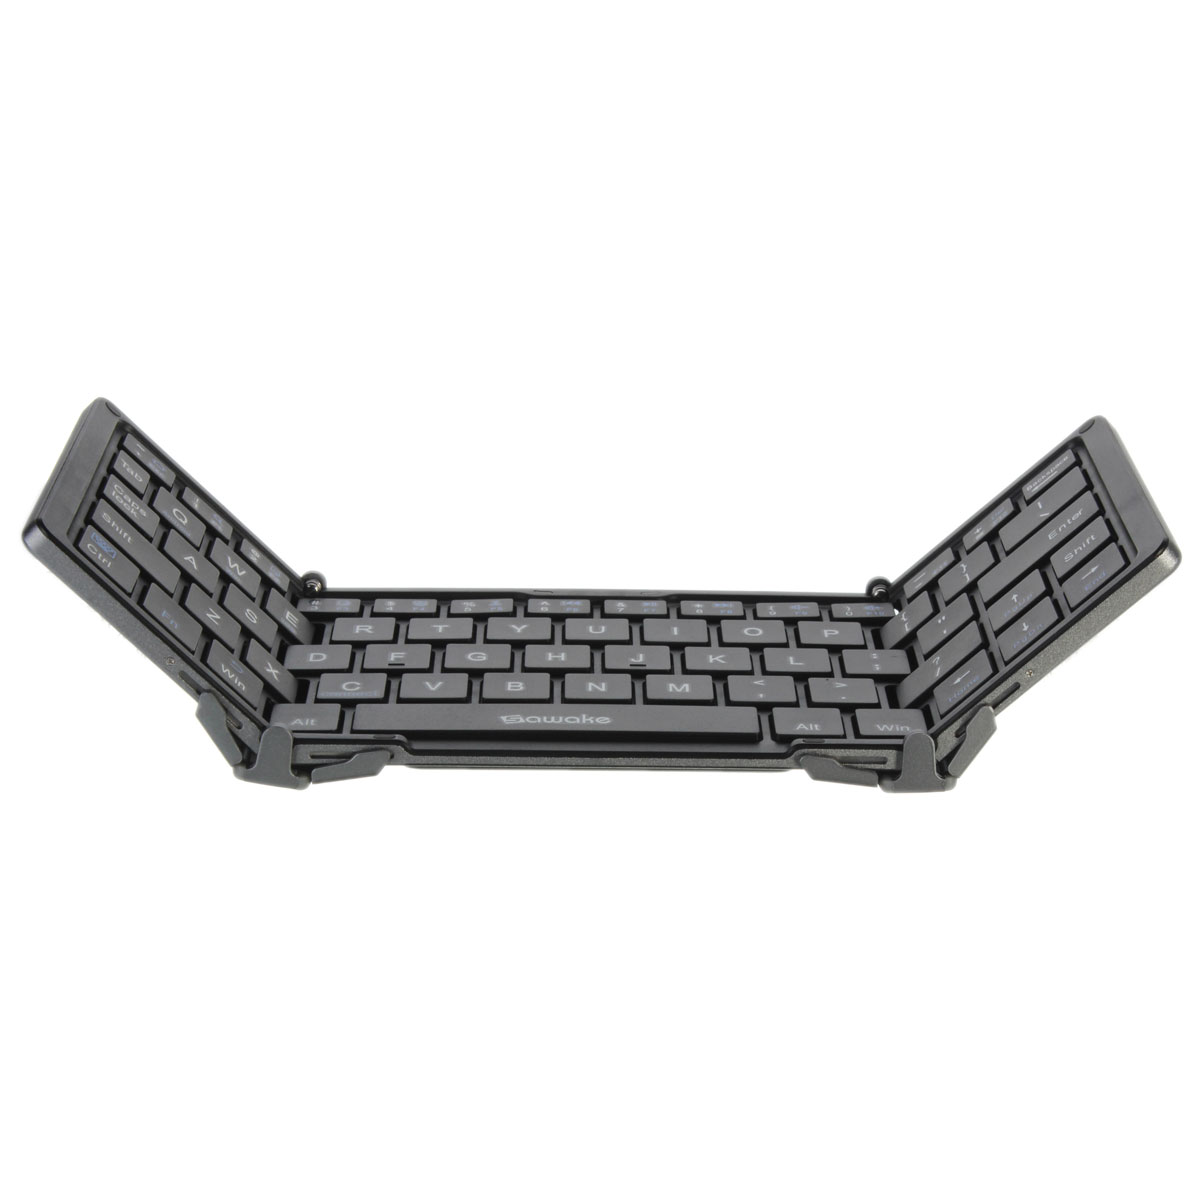 Find Sawake Portable Foldable bluetooth 3.0 Keyboard Ultra Thin Mini Wireless Keypad for Apple iOS/Andriod/Microsoft System PC Tablet Smartphone for Sale on Gipsybee.com with cryptocurrencies